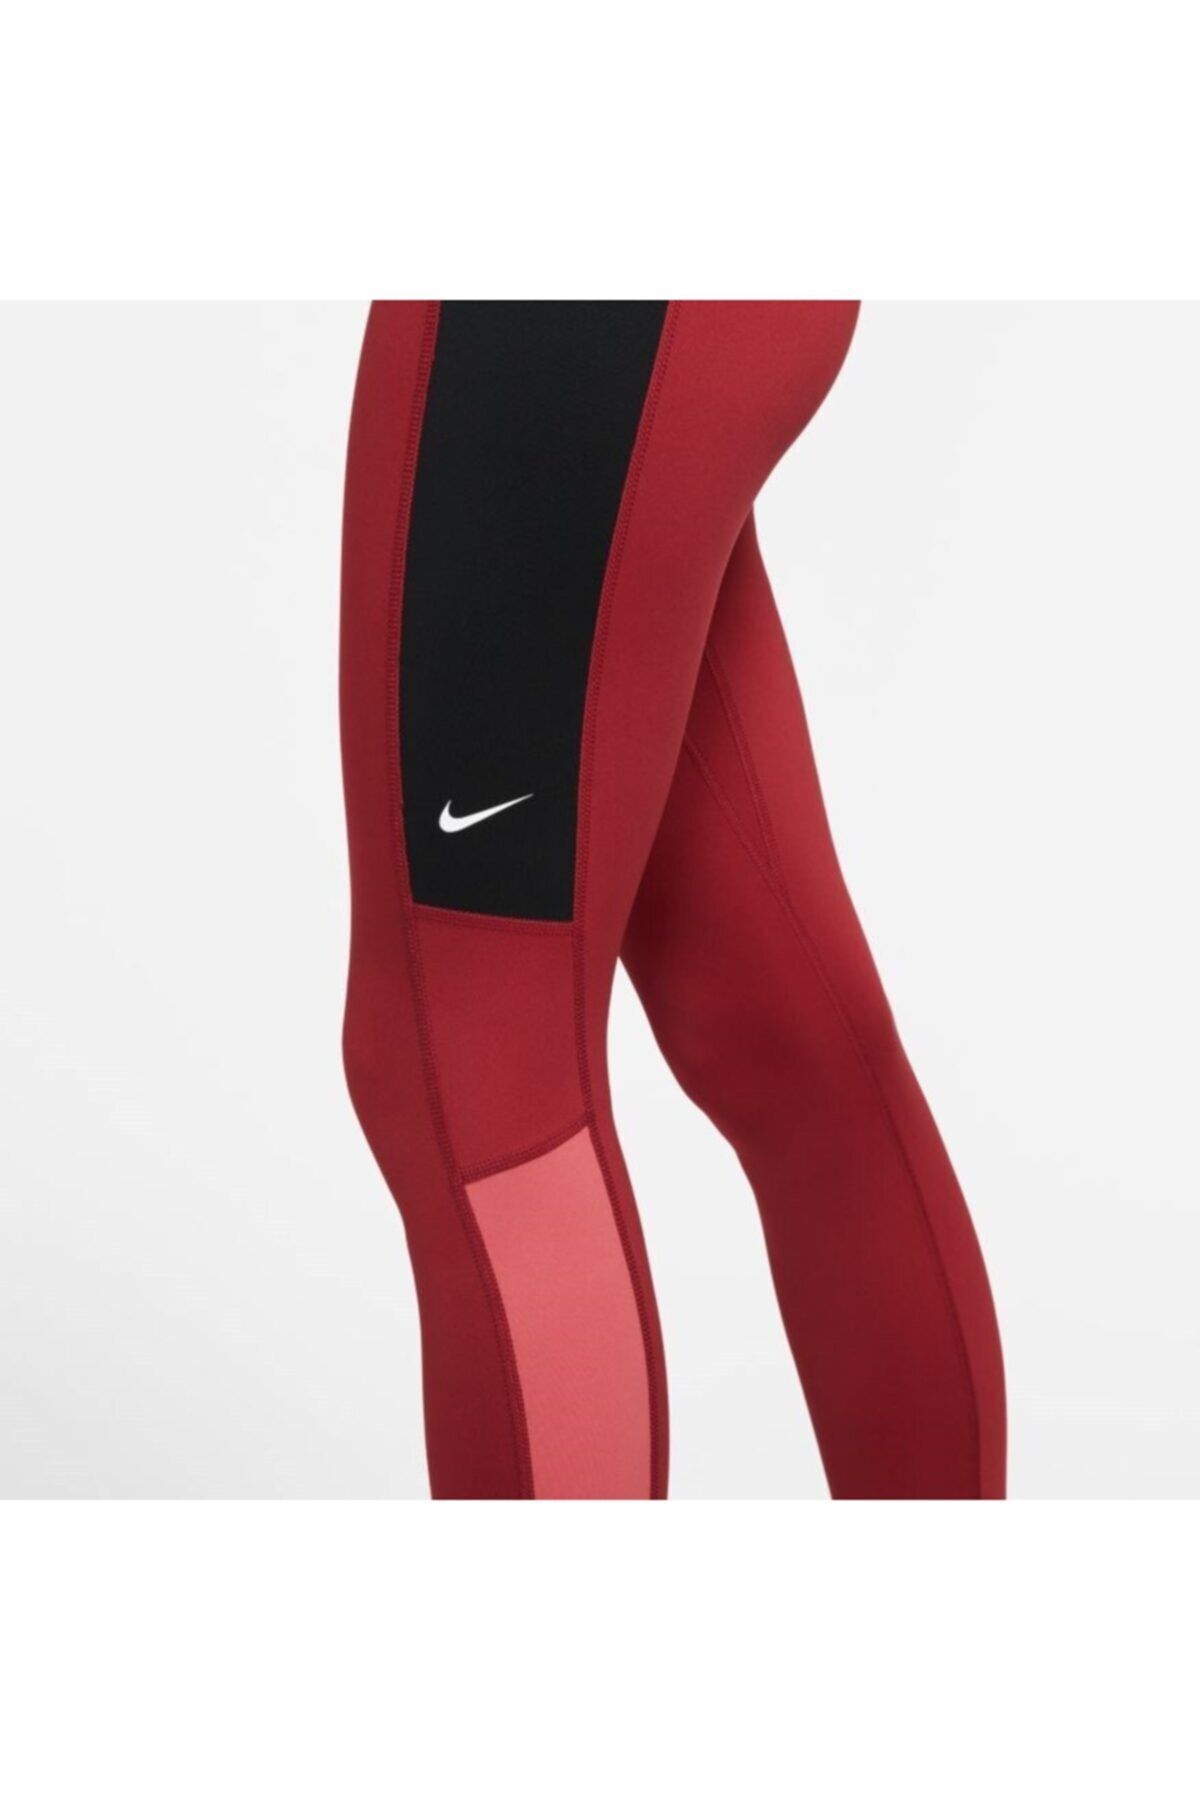 Women's Nike One Colorblock Training Tights FinestVibes